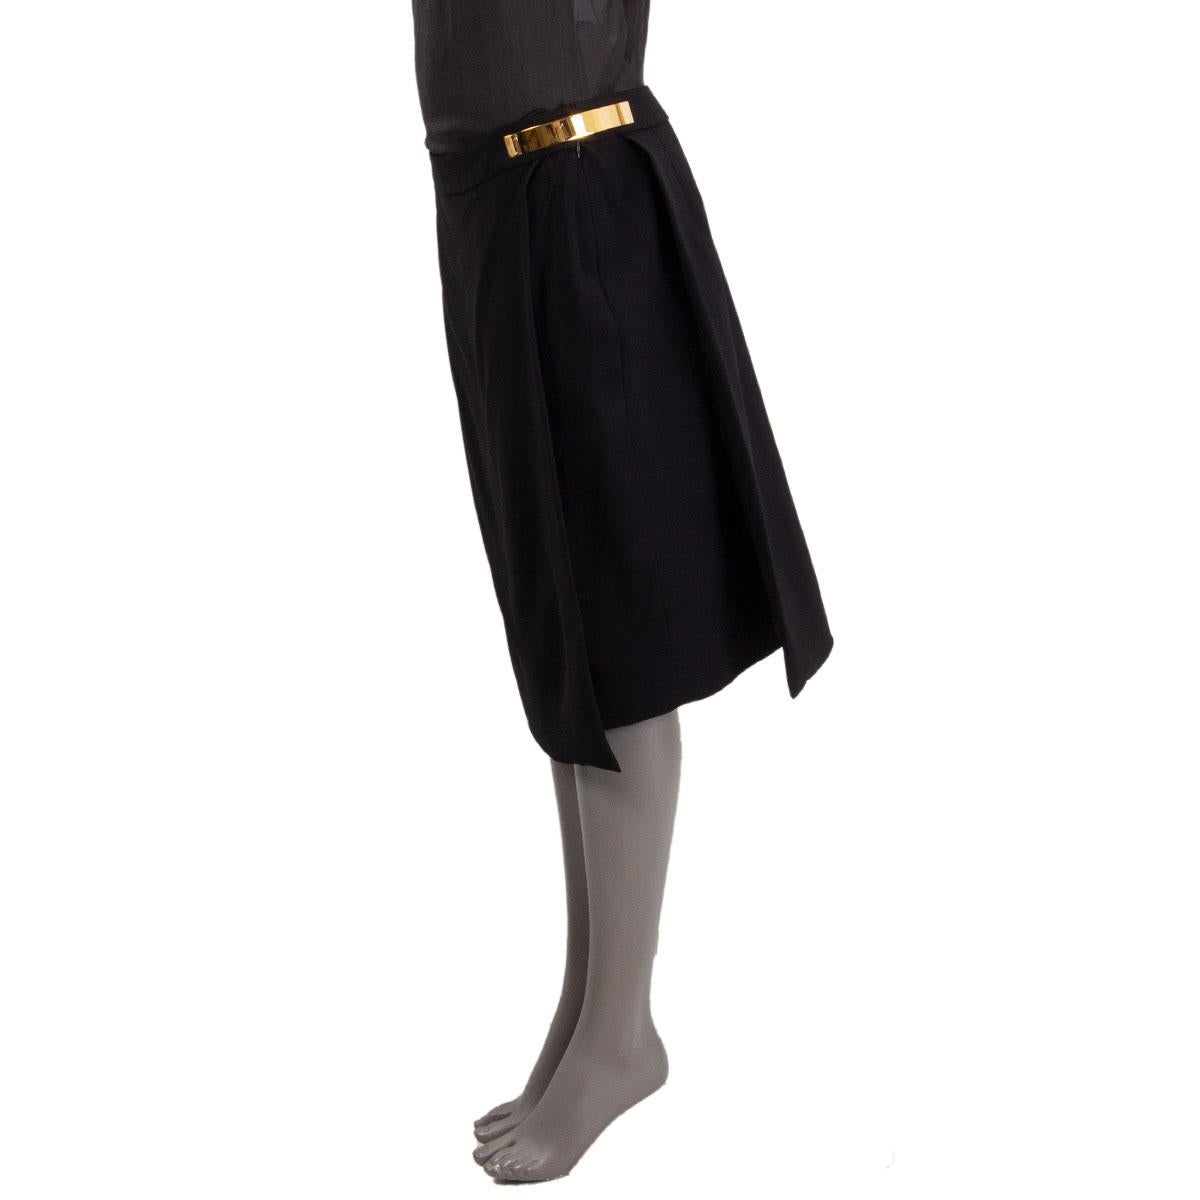 100% authentic Givenchy paneled pencil skirt in black viscose (96%) elastane (4%) with two golden metal parts at the waist and two overlap in the front and back. Closes with concealed zipper at the left side. Lined in black viscose (100%). Has been